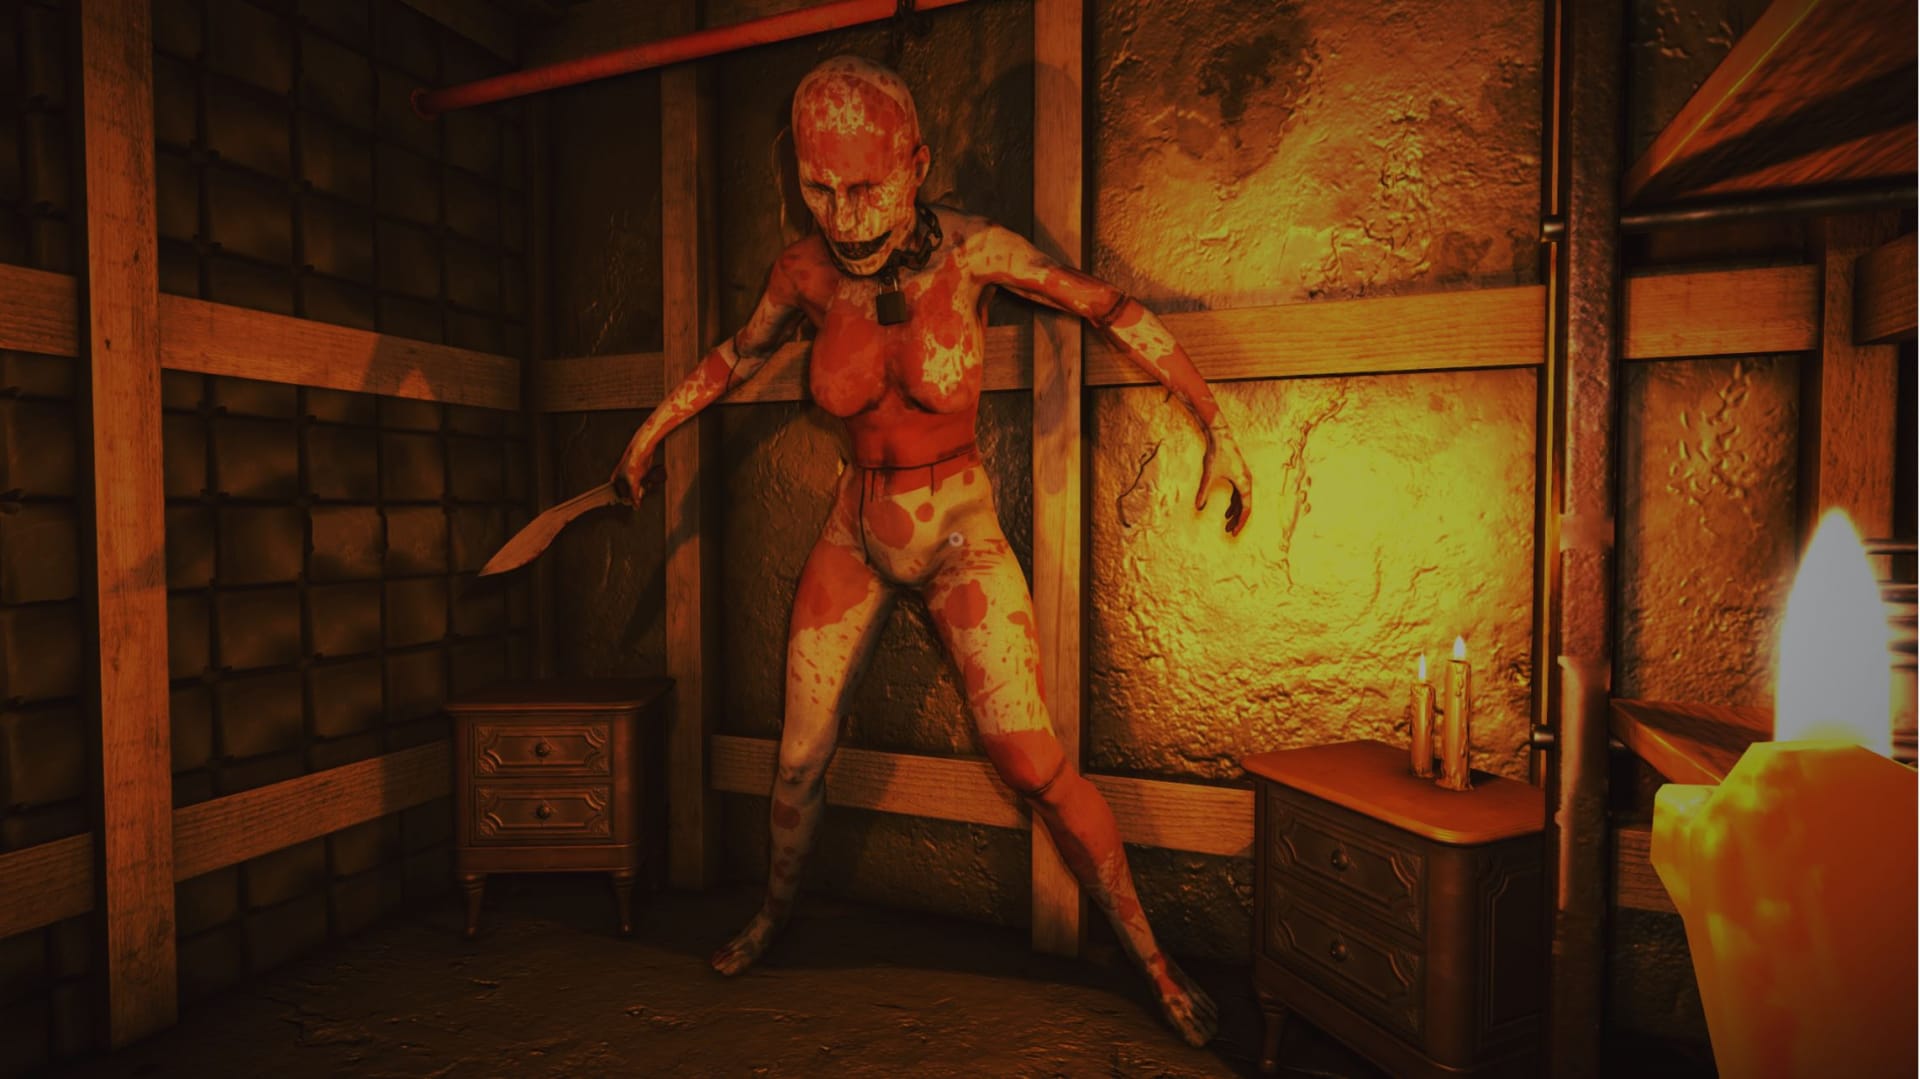 A giant, bloodied mannequin woman chained to the wall and holding a knife